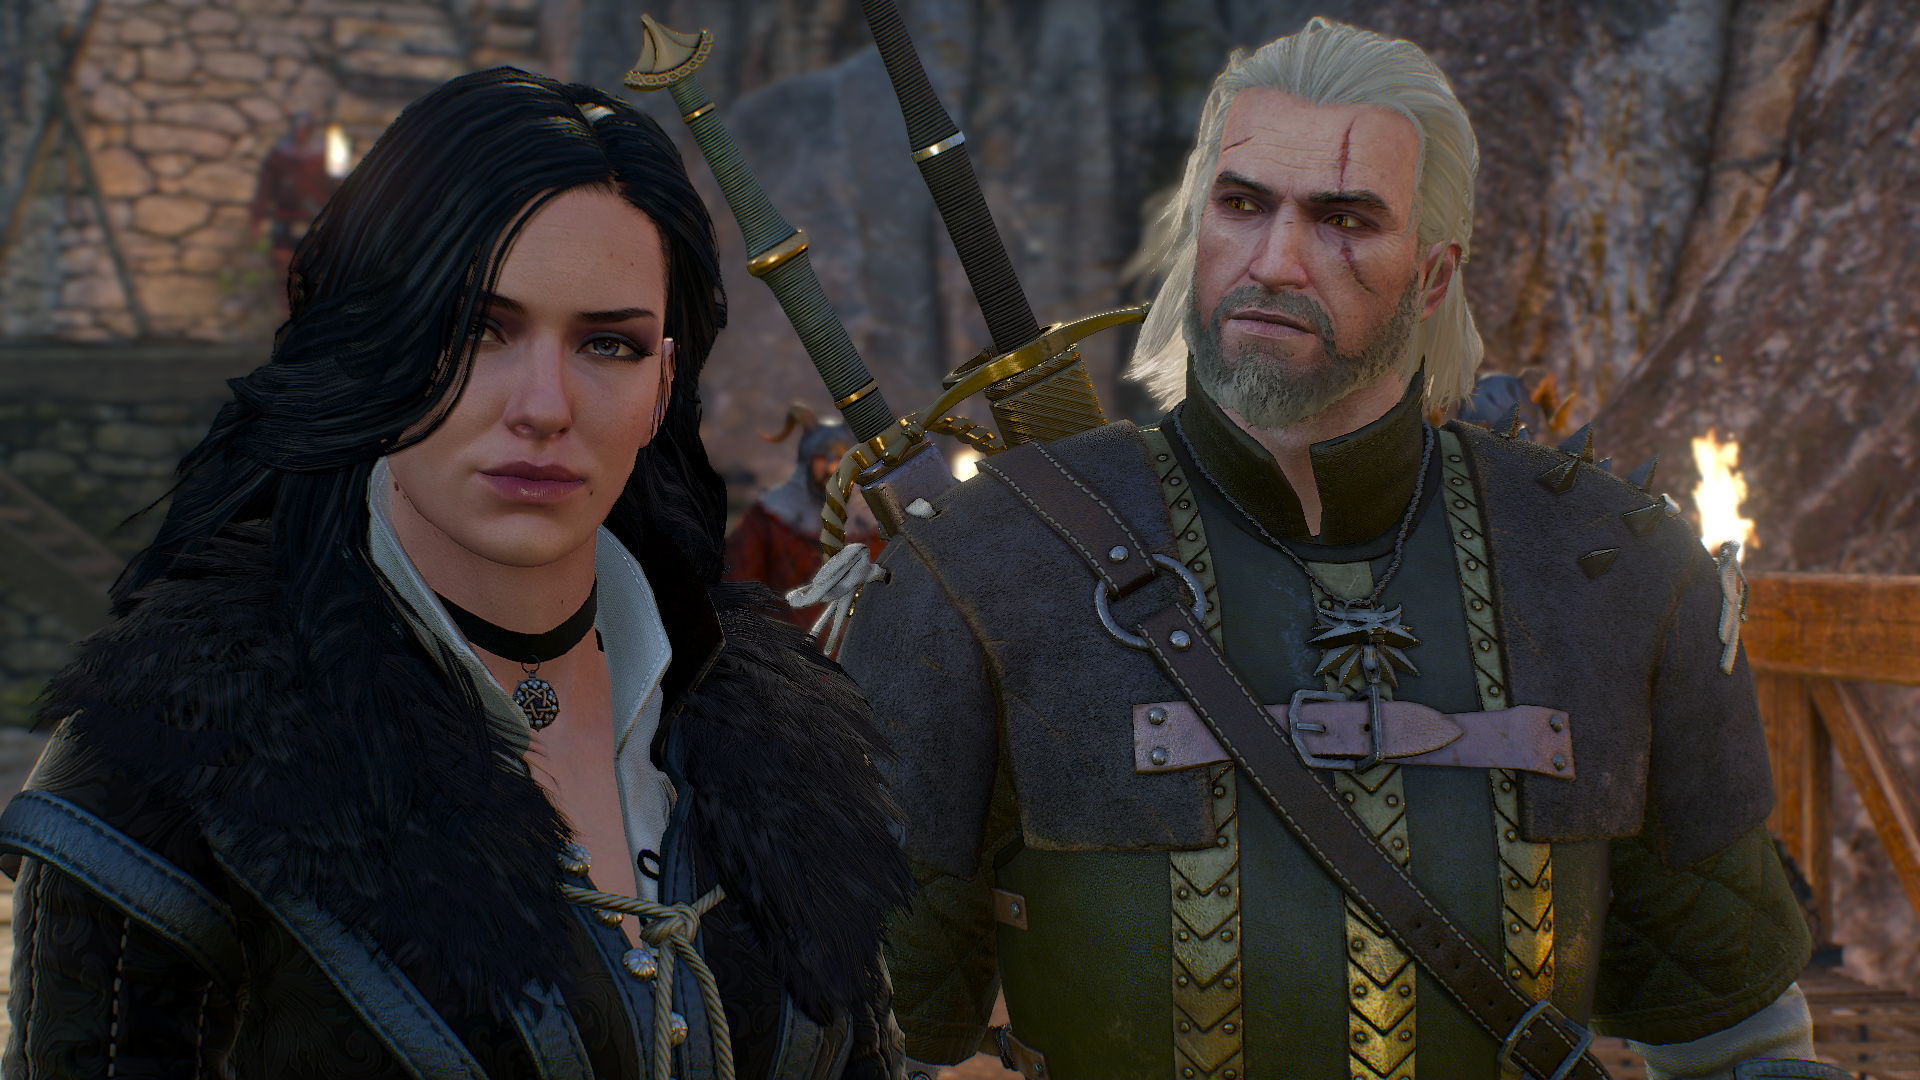 Future Games Show will host the voices of Geralt and Jennyfair from The Witcher